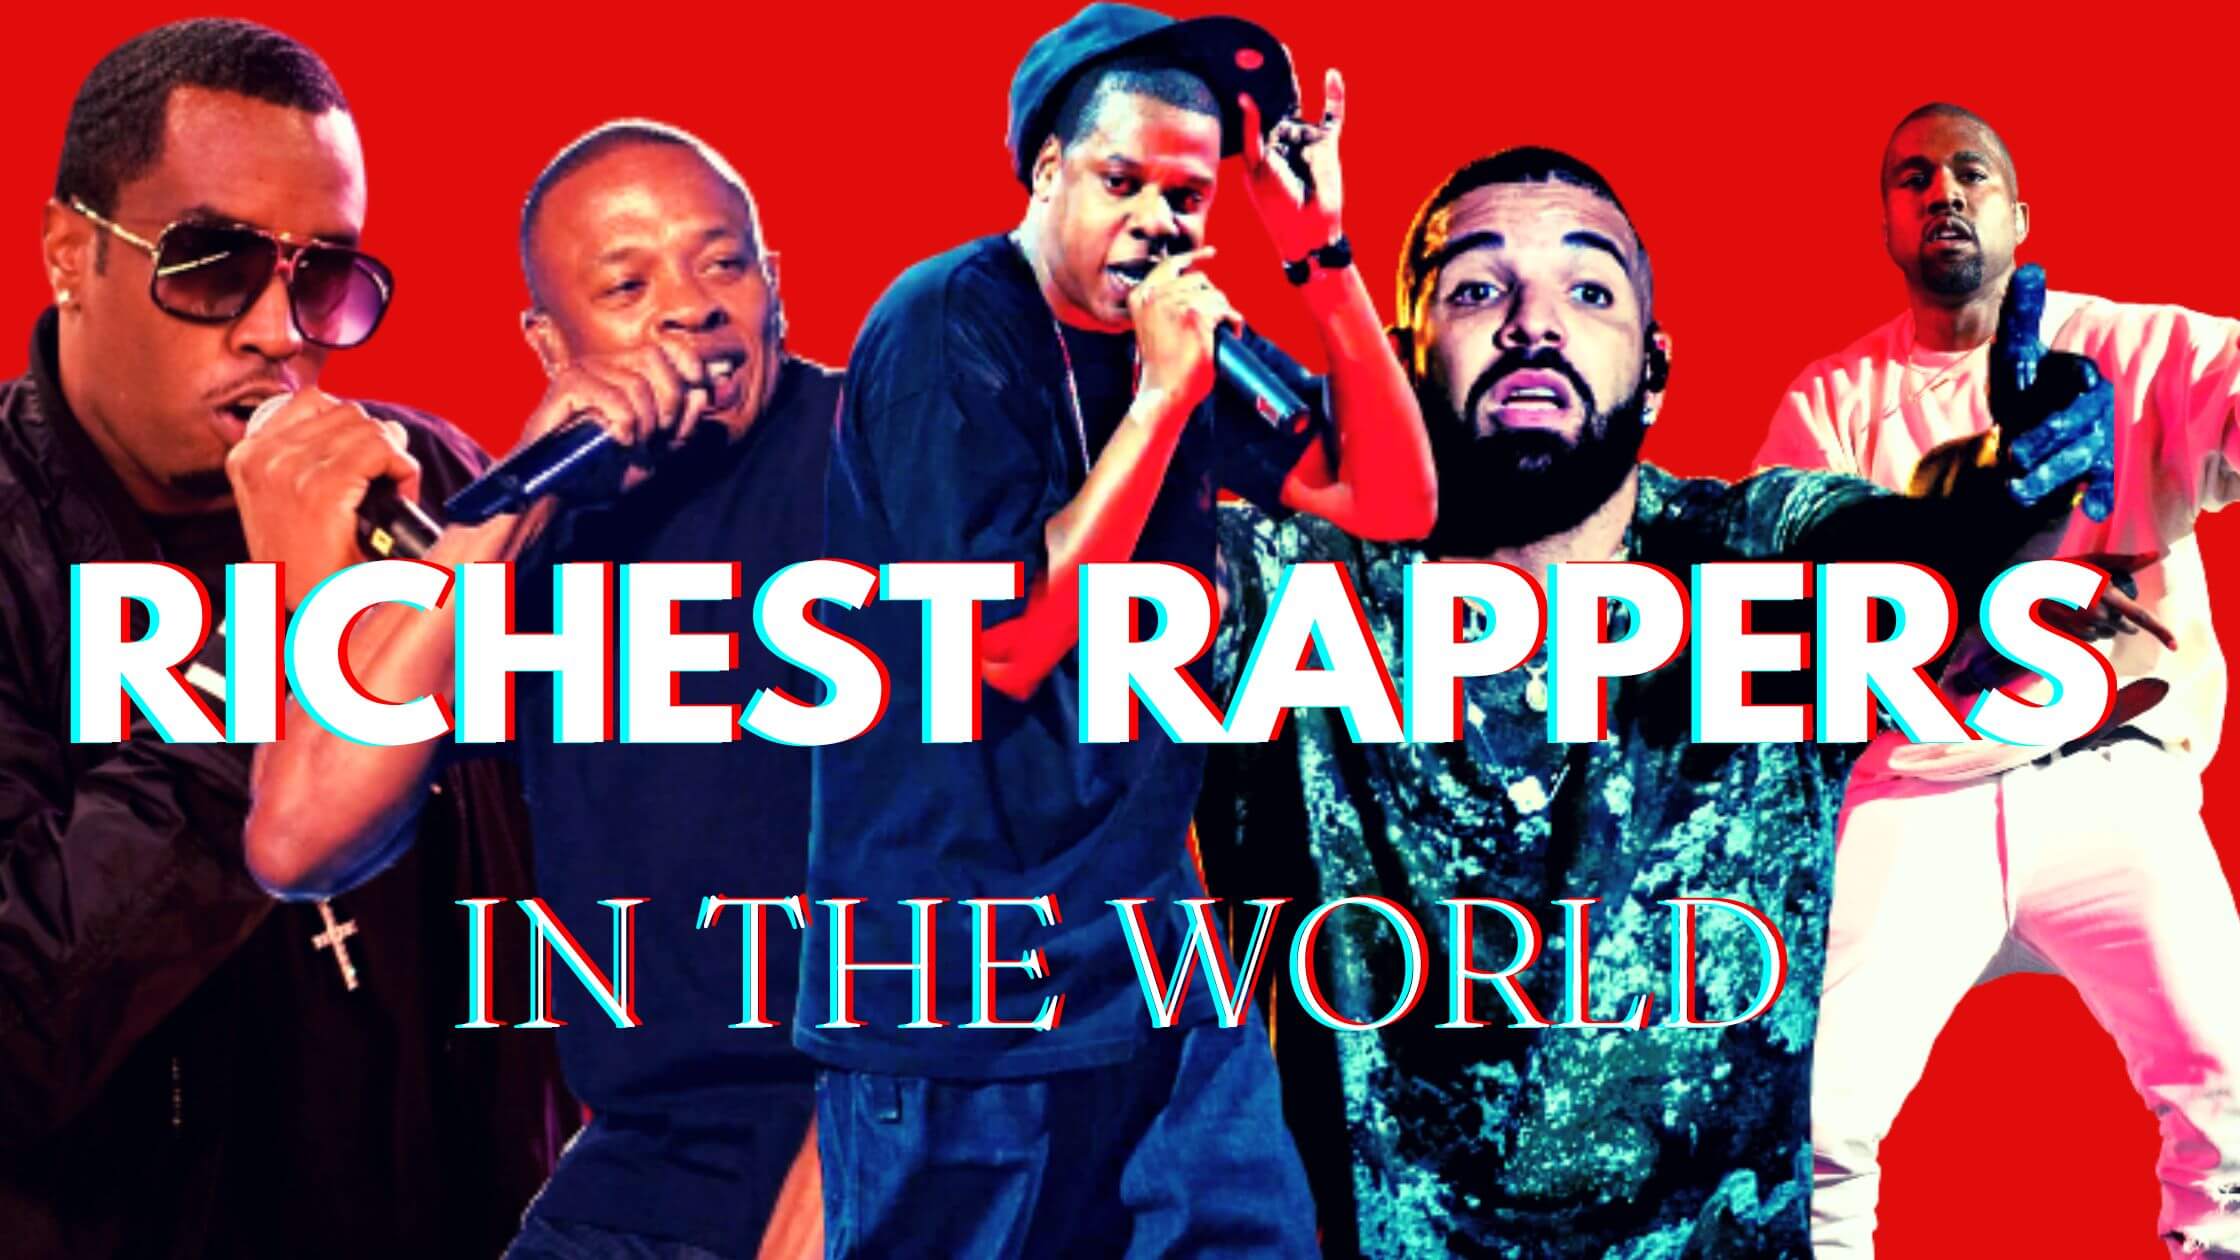 overvåge liv orkester 5 Richest Rappers In The World: The Tycoons Of RAP